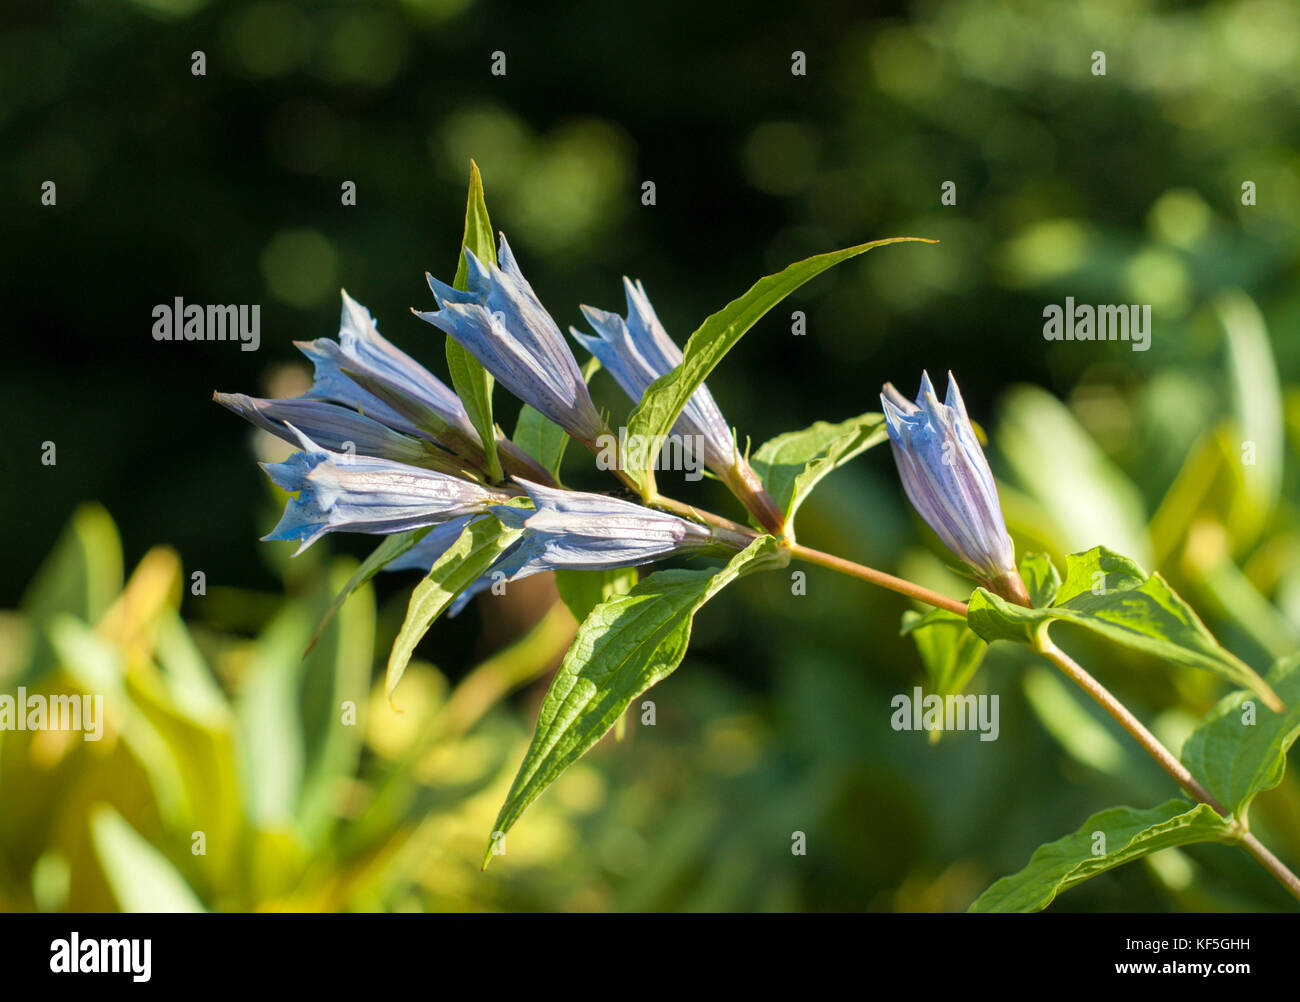 inflorescence of star gentian (also known as cross gentian) closeup on blurred background Stock Photo